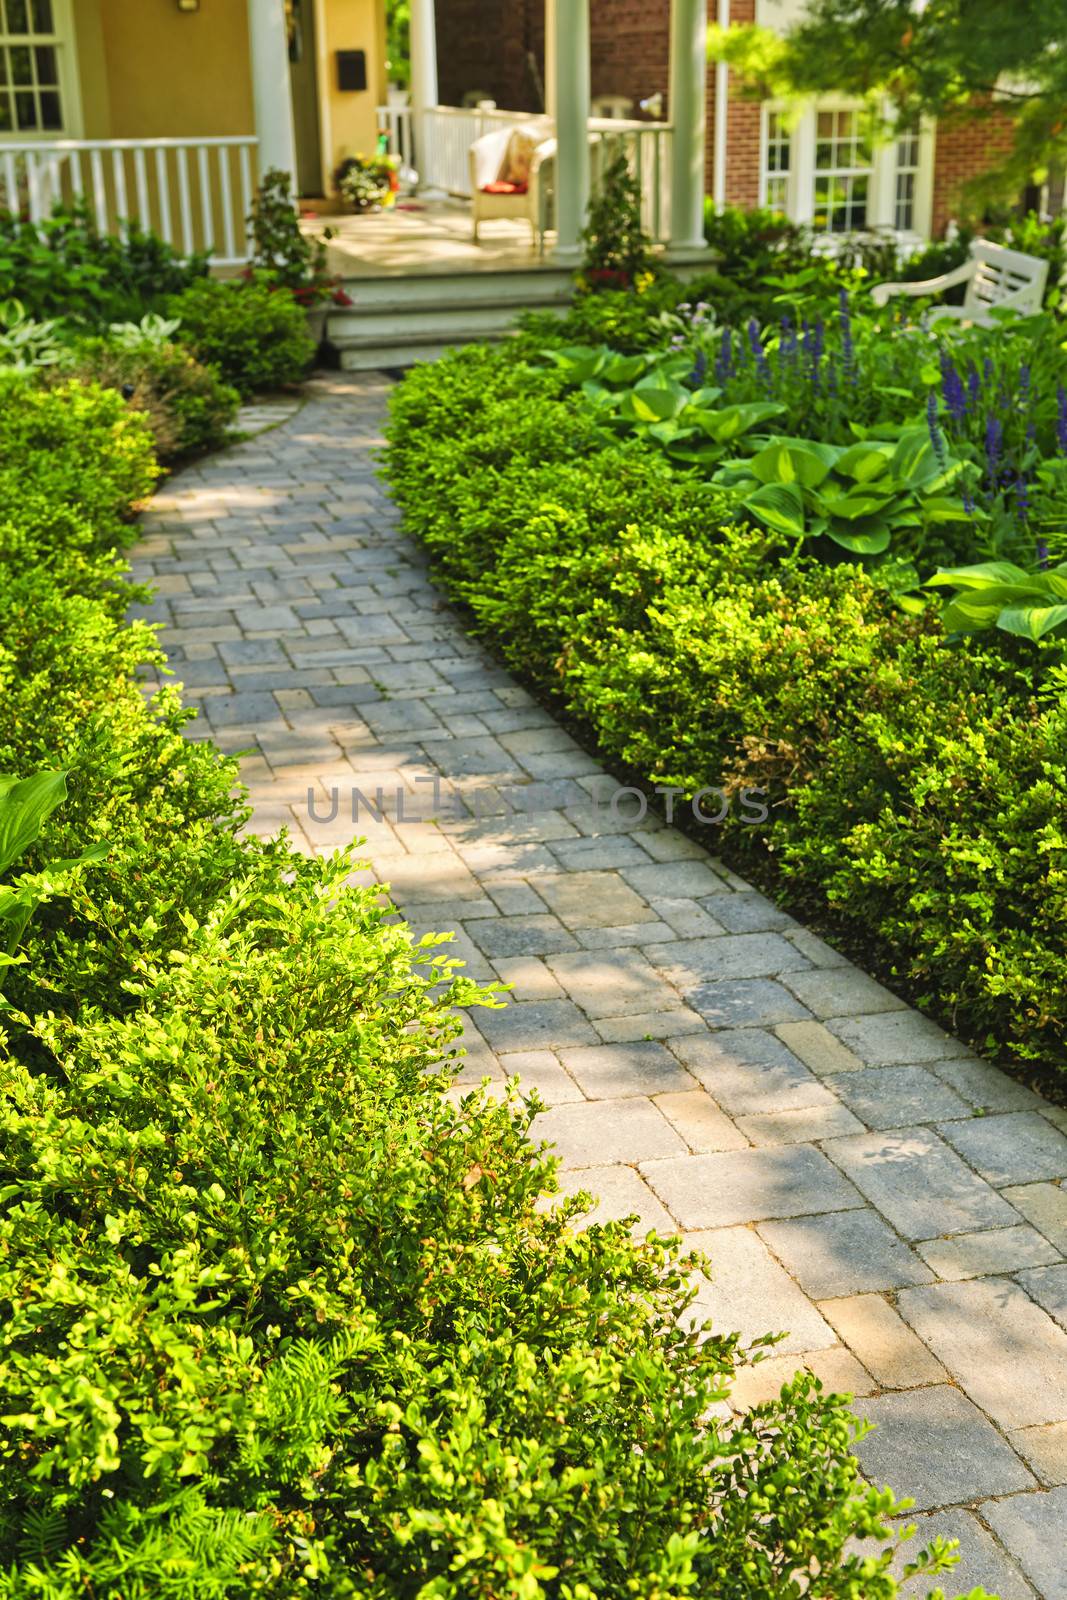 Stone path in landscaped home garden by elenathewise